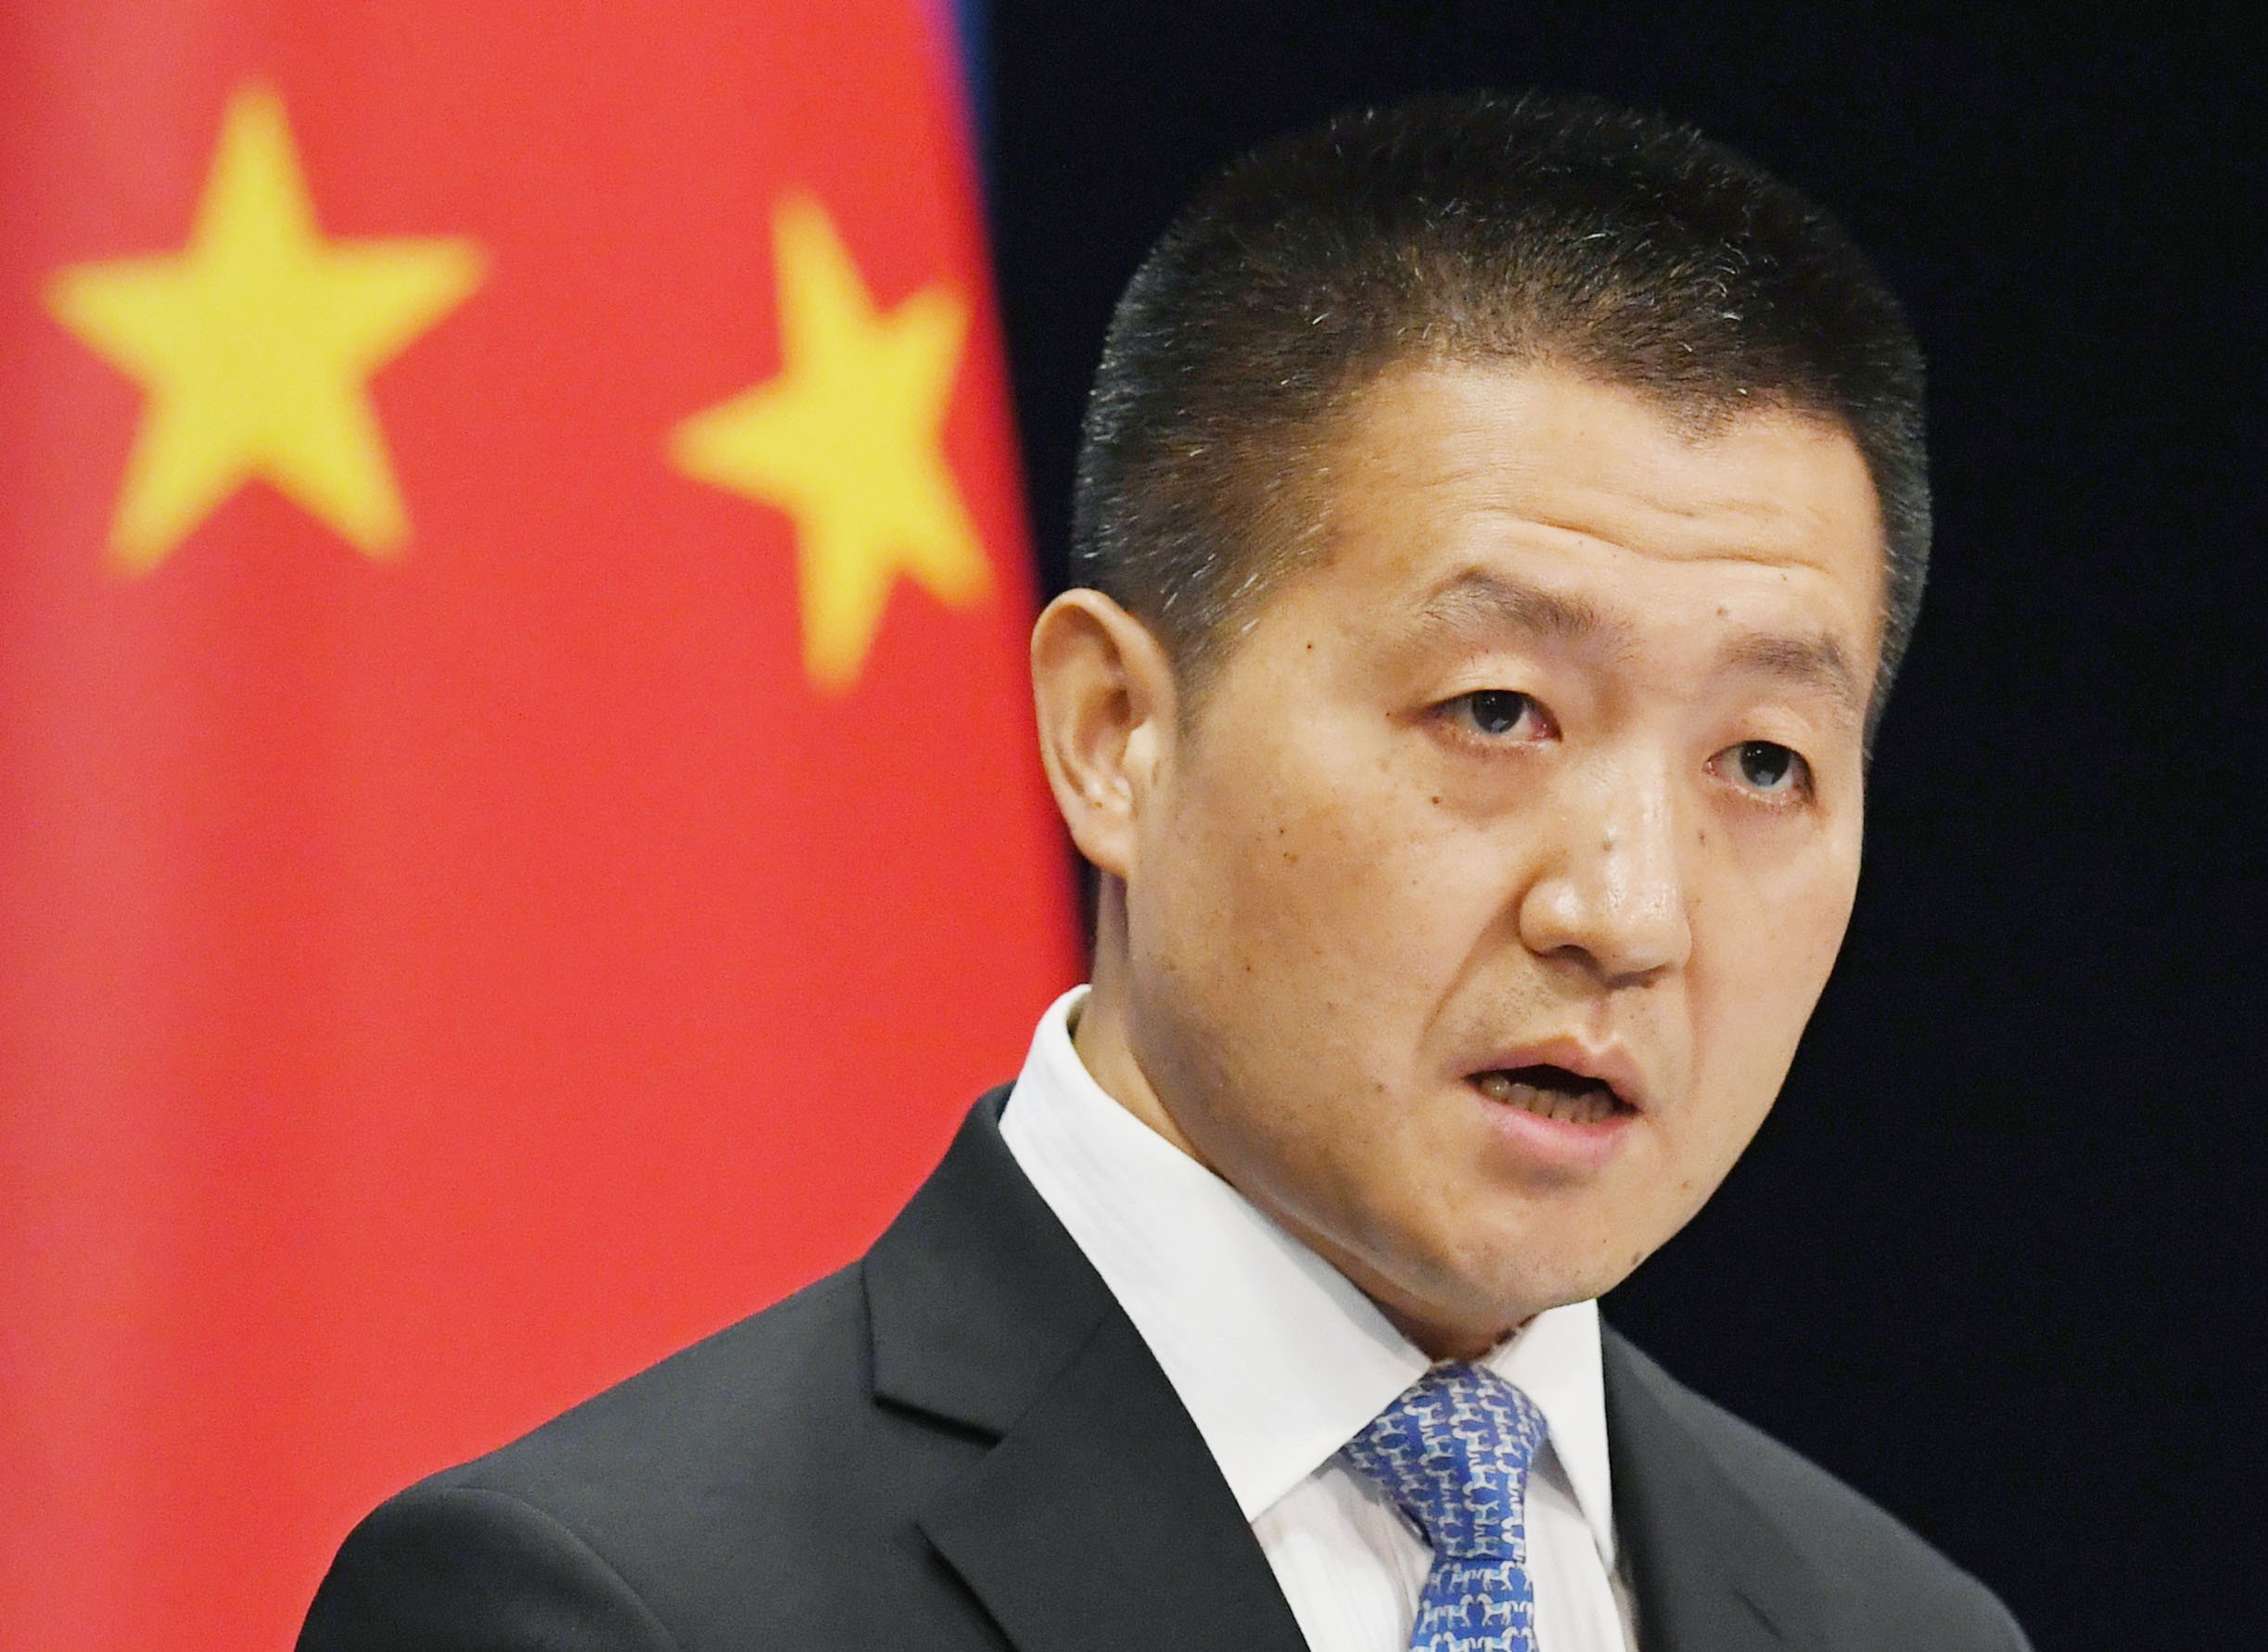 Lu also said that what made Hong Kong a success ‘was not up to any outsider to comment on’. Photo: Kyodo